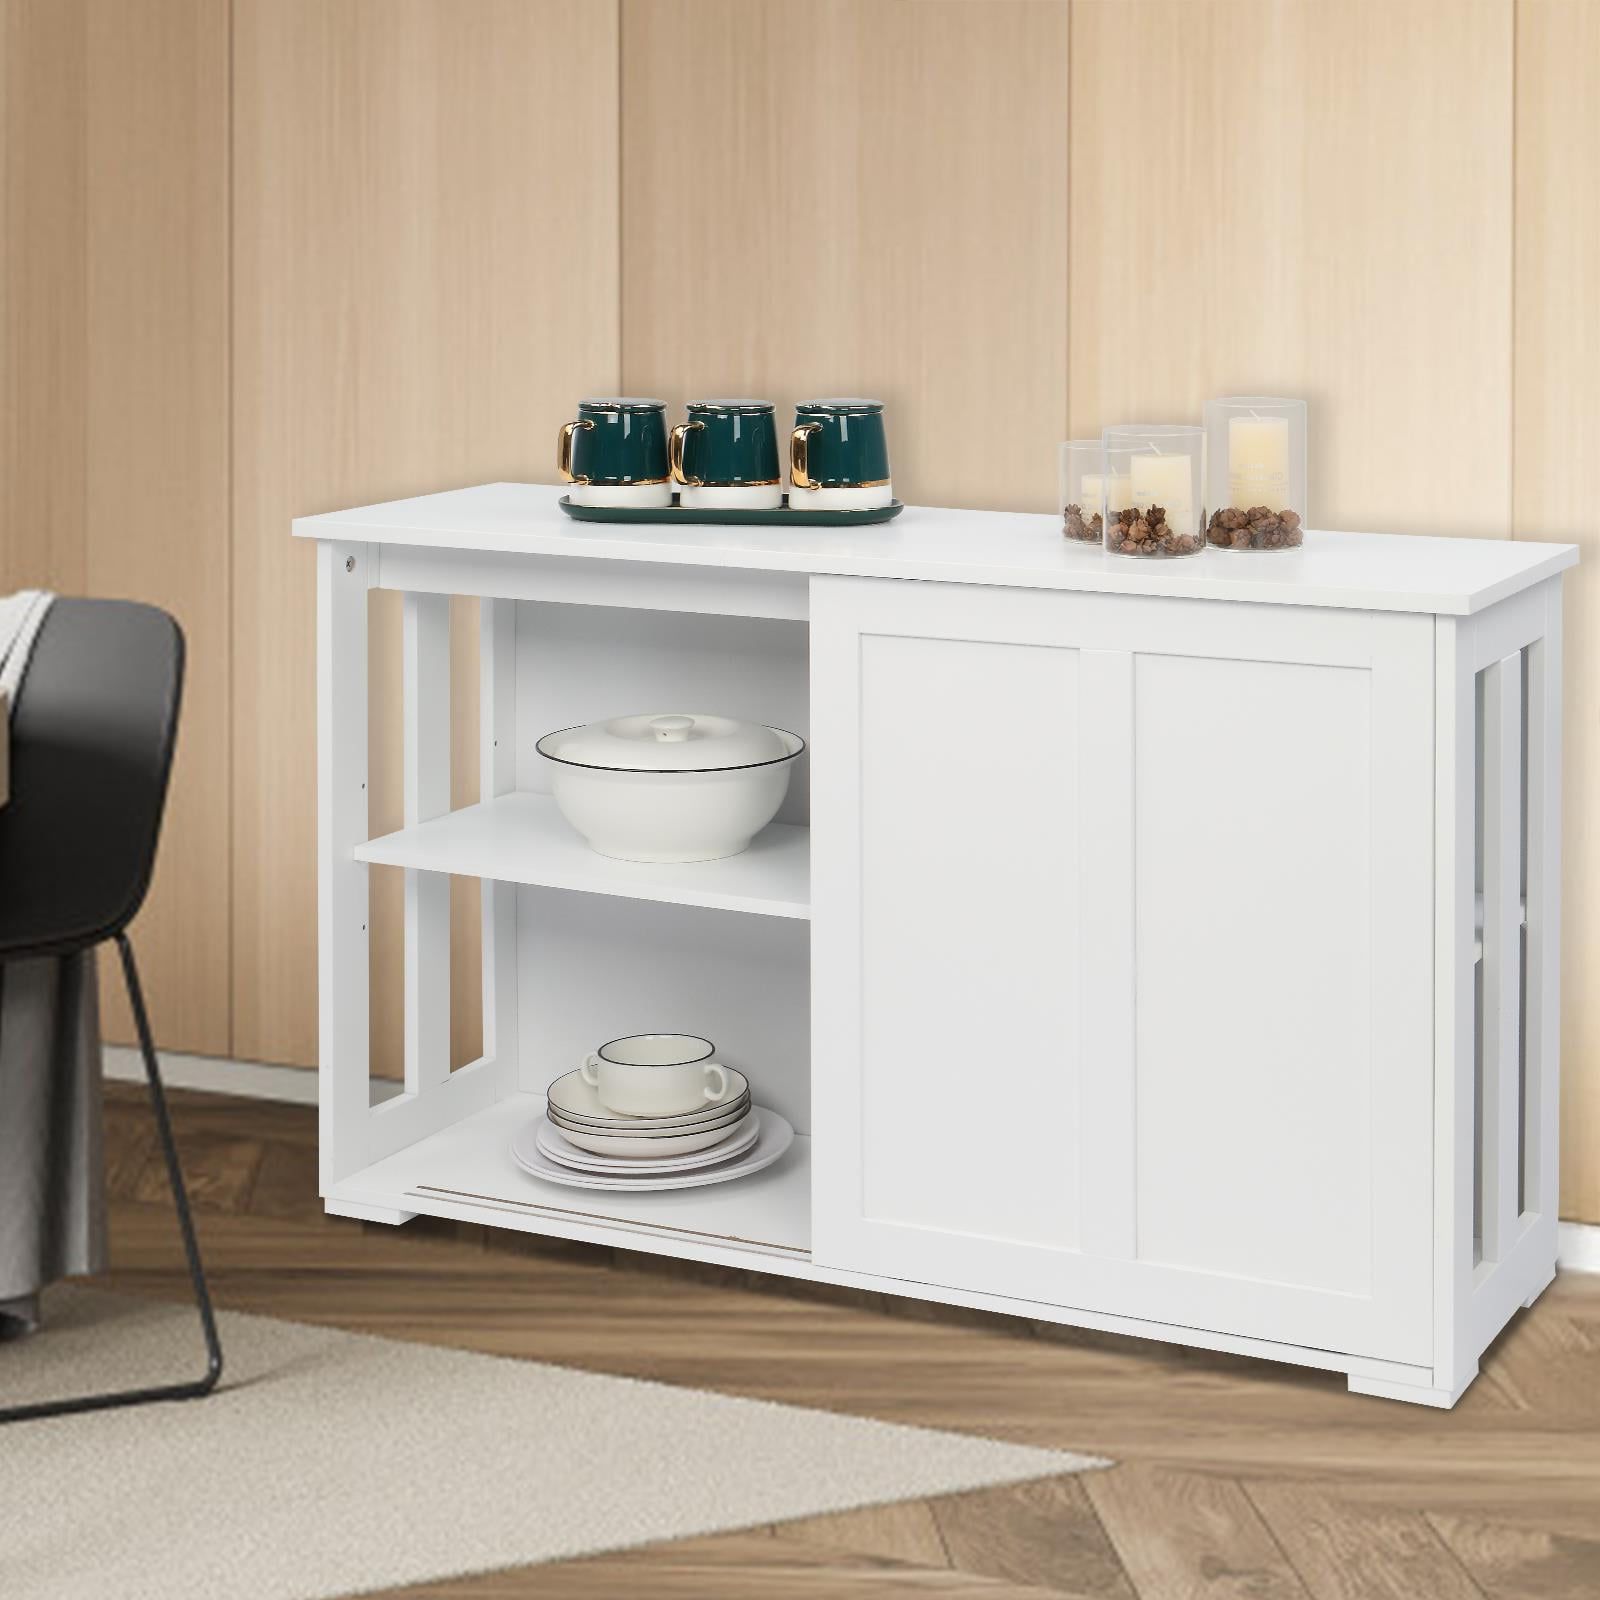 Zimtown Wood 42 Inch Sideboard Buffet Storage Cabinet Console Sofa Table  With Sliding Doors White – Walmart In Sideboards Double Barn Door Buffet (Gallery 8 of 20)